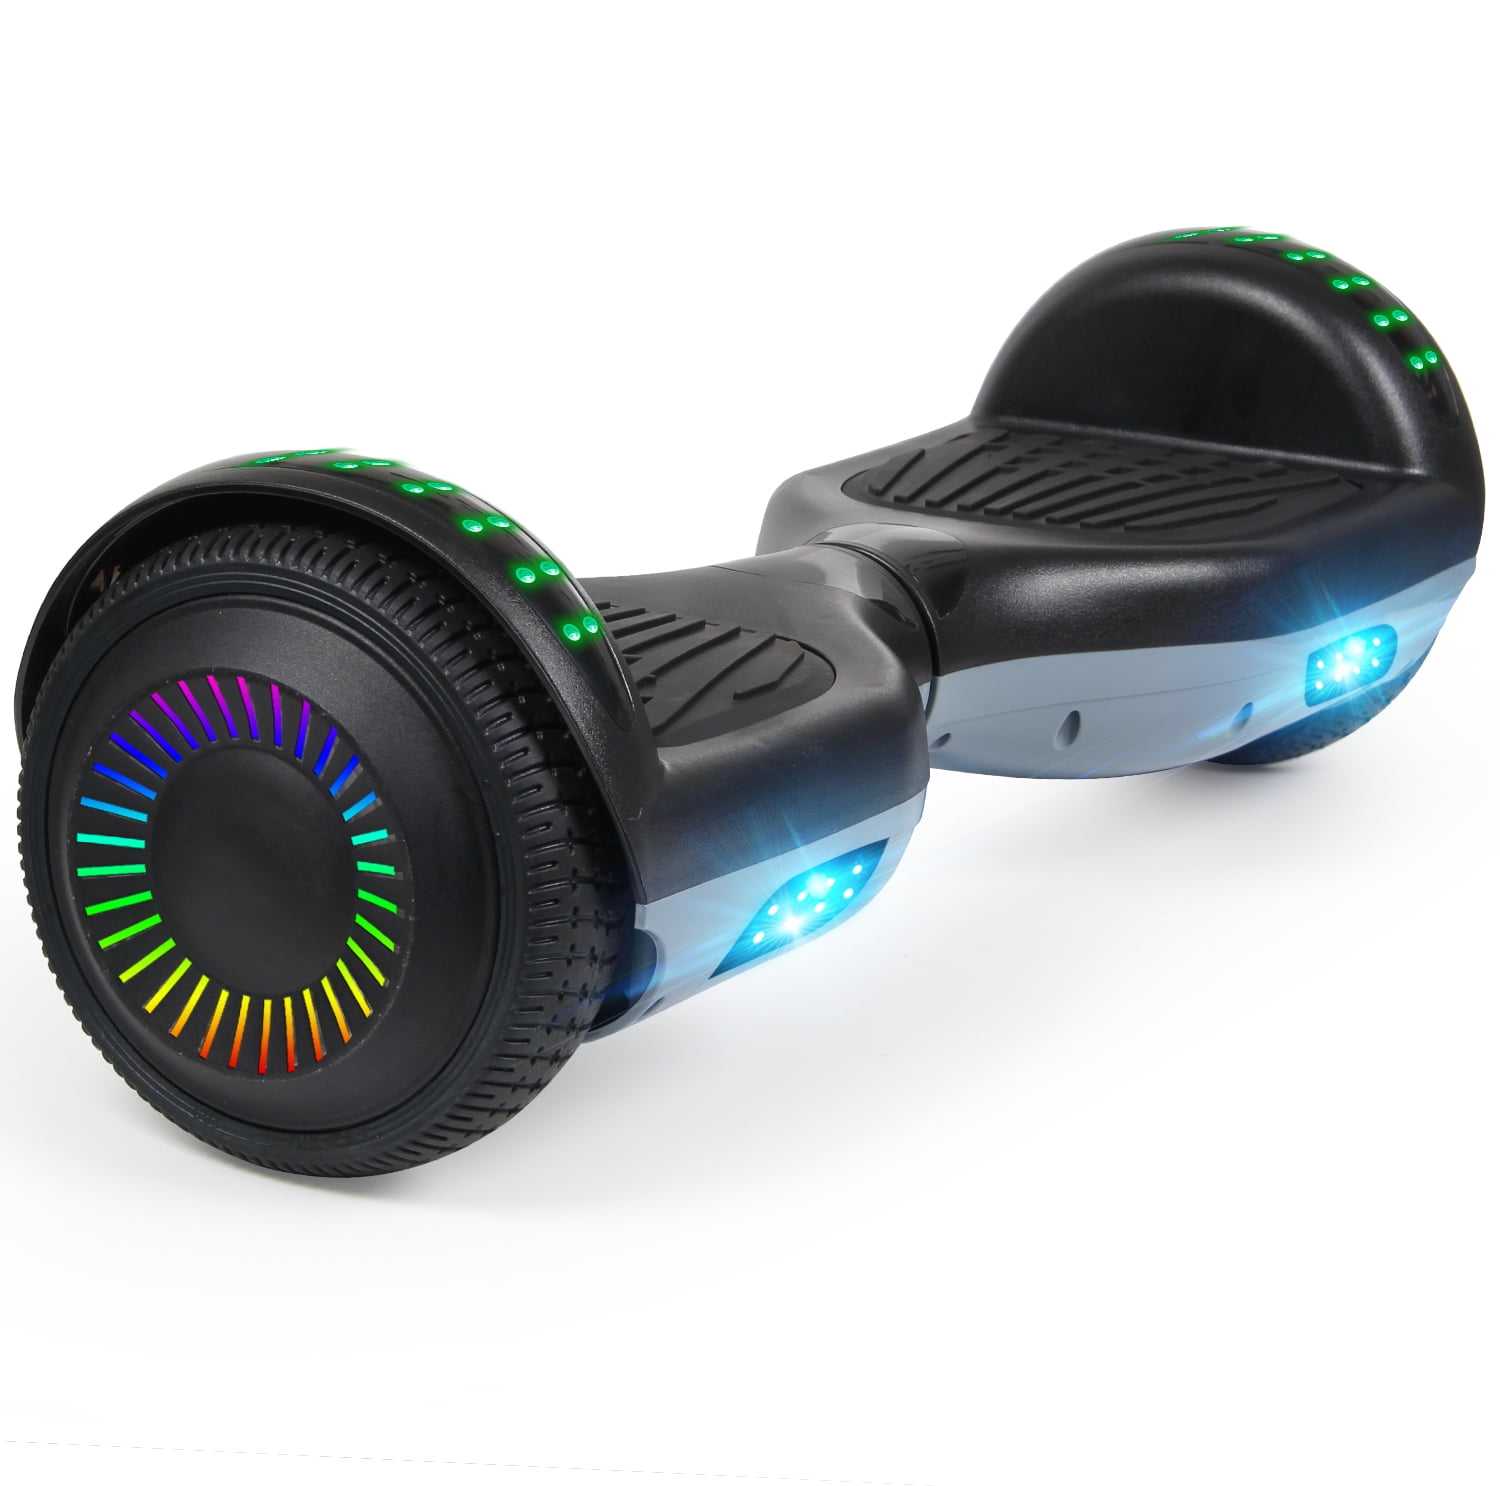 All Terrain Off Road Two-Wheel 6.5 inch Self Balancing Scooter with Bluetooth Speaker and LED Wheel for Kids Adults CBD Flash Hoverboard